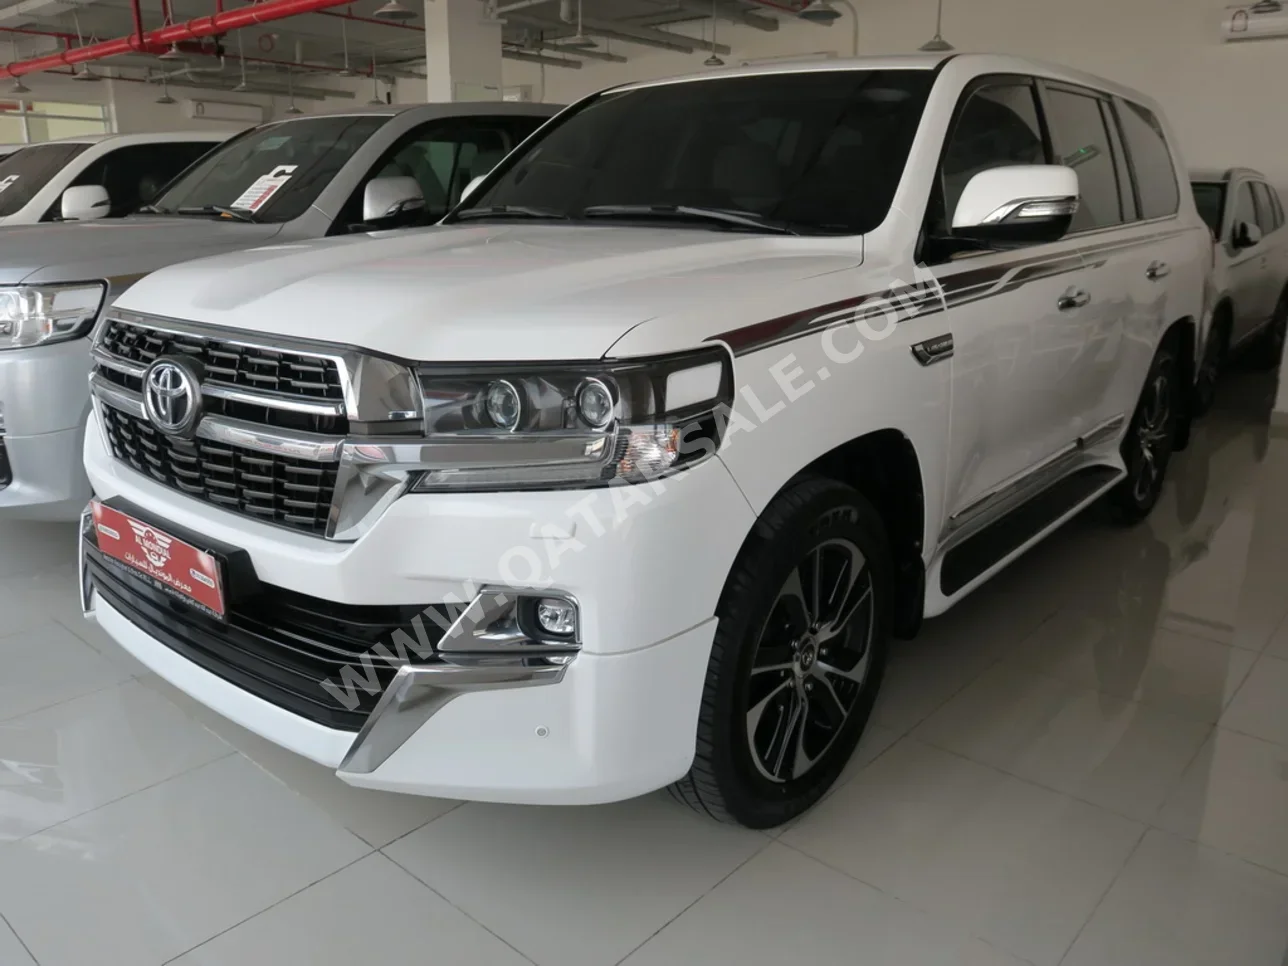 Toyota  Land Cruiser  GXR- Grand Touring  2021  Automatic  188,000 Km  8 Cylinder  Four Wheel Drive (4WD)  SUV  White